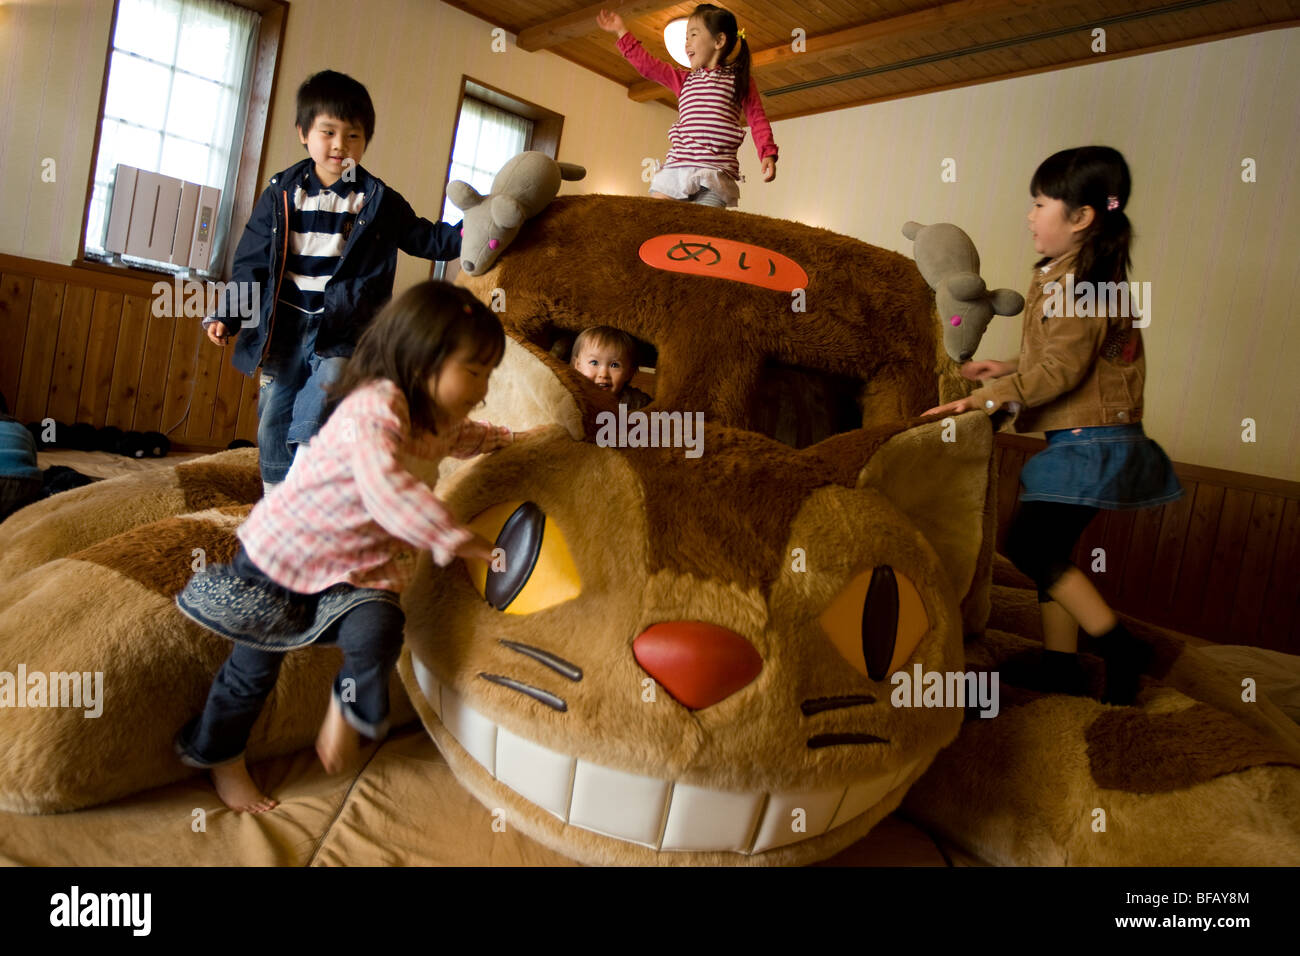 Children play on 'Cat Bus'- a recreation of a character from the animated film 'My Neighbour Totoro' inside Ghibli Museum, Tokyo Stock Photo